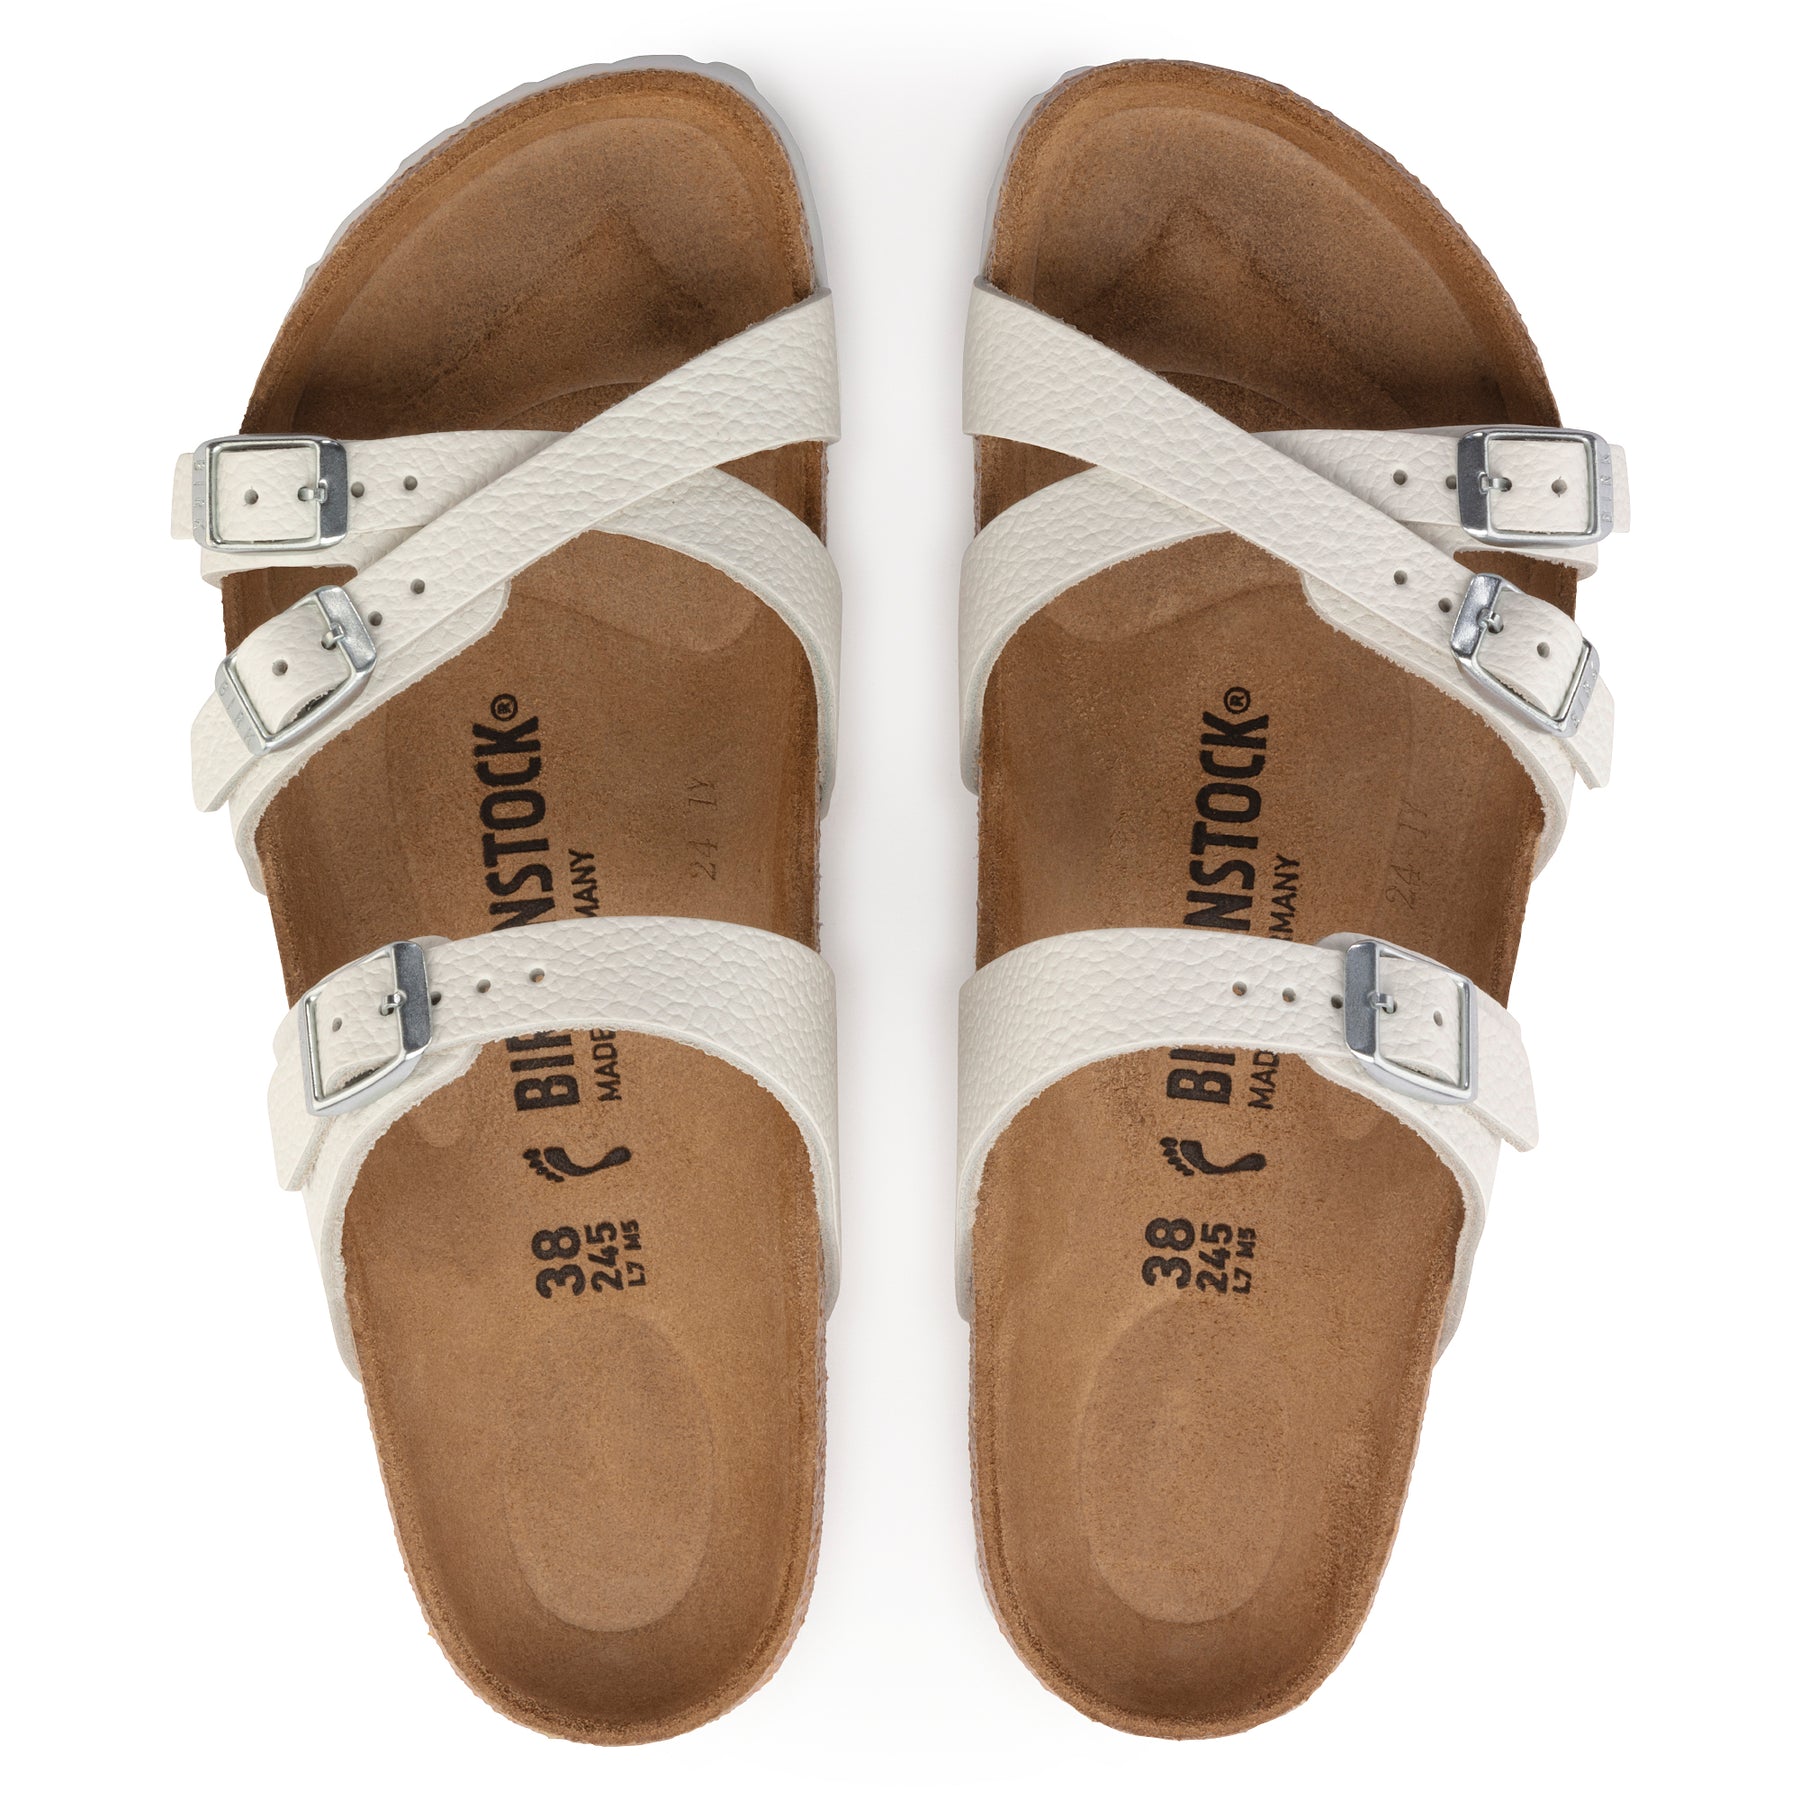 Birkenstock Limited Edition Franca white leather